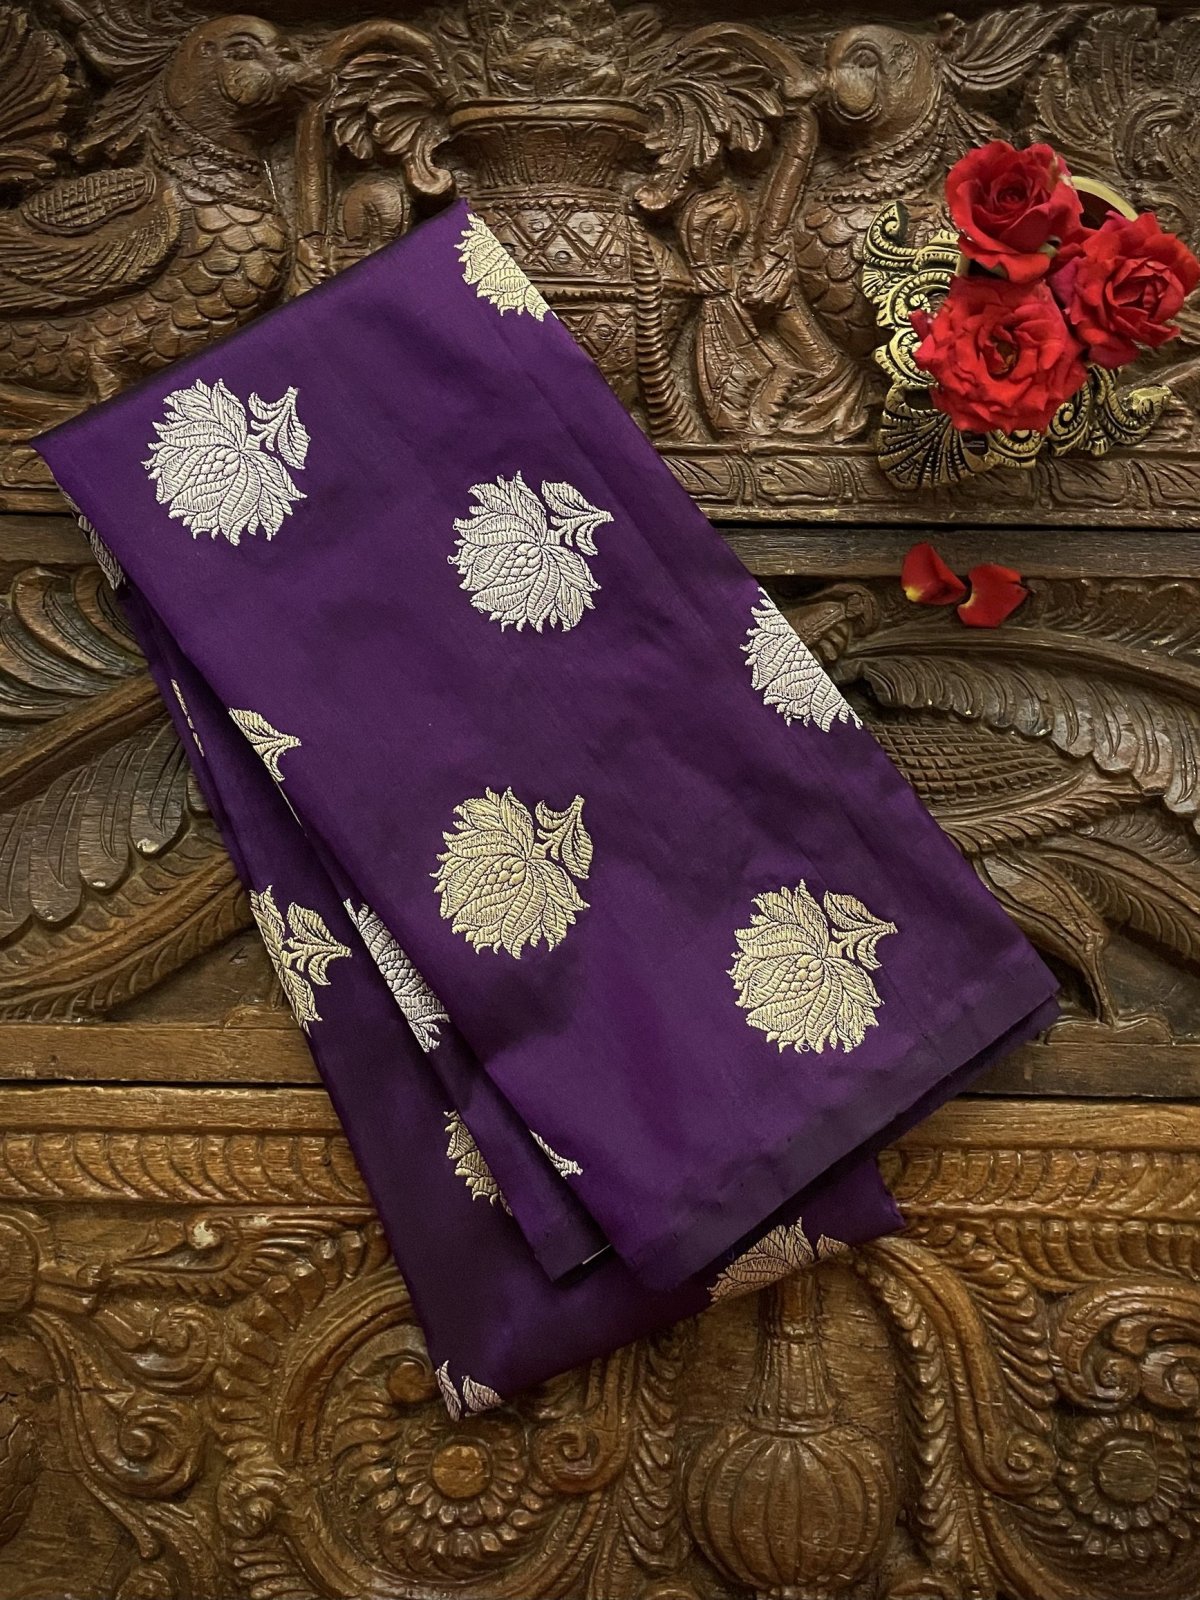 Purple Banaras Silk Blouse With Gold and Silver Zari Floral Butties